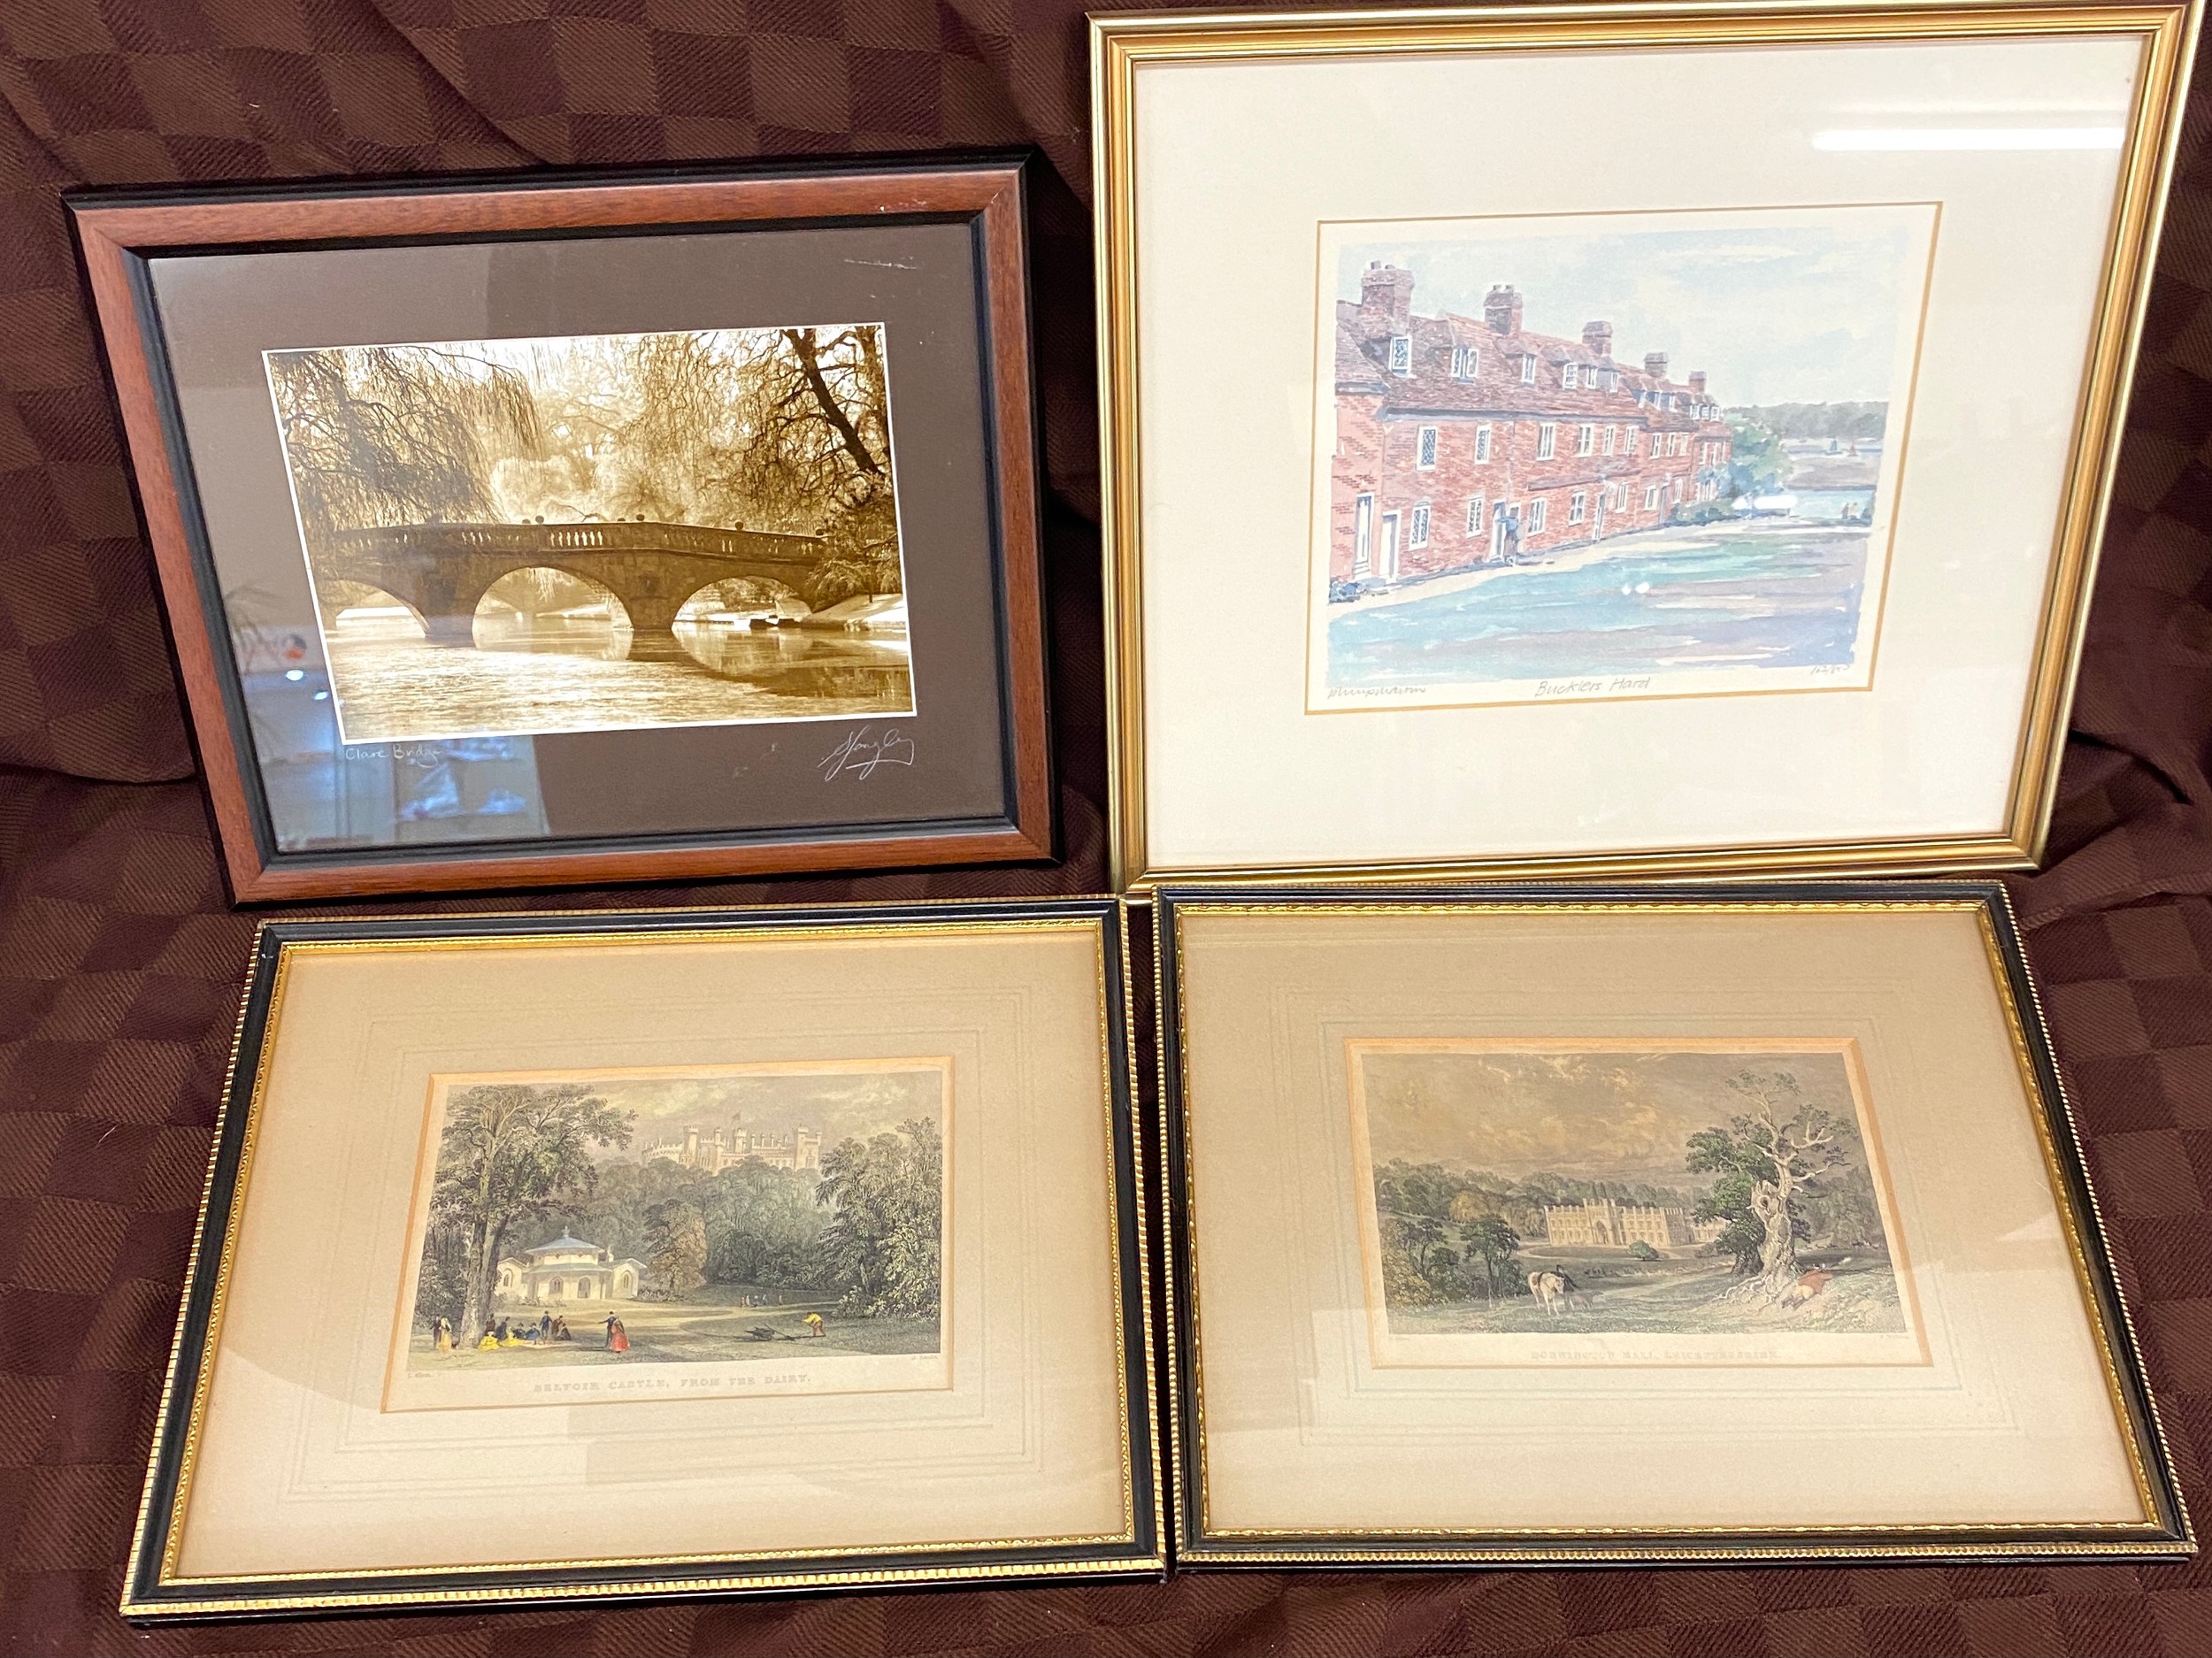 4 Framed prints, largest print measures approx 11" tall 12.5" wide